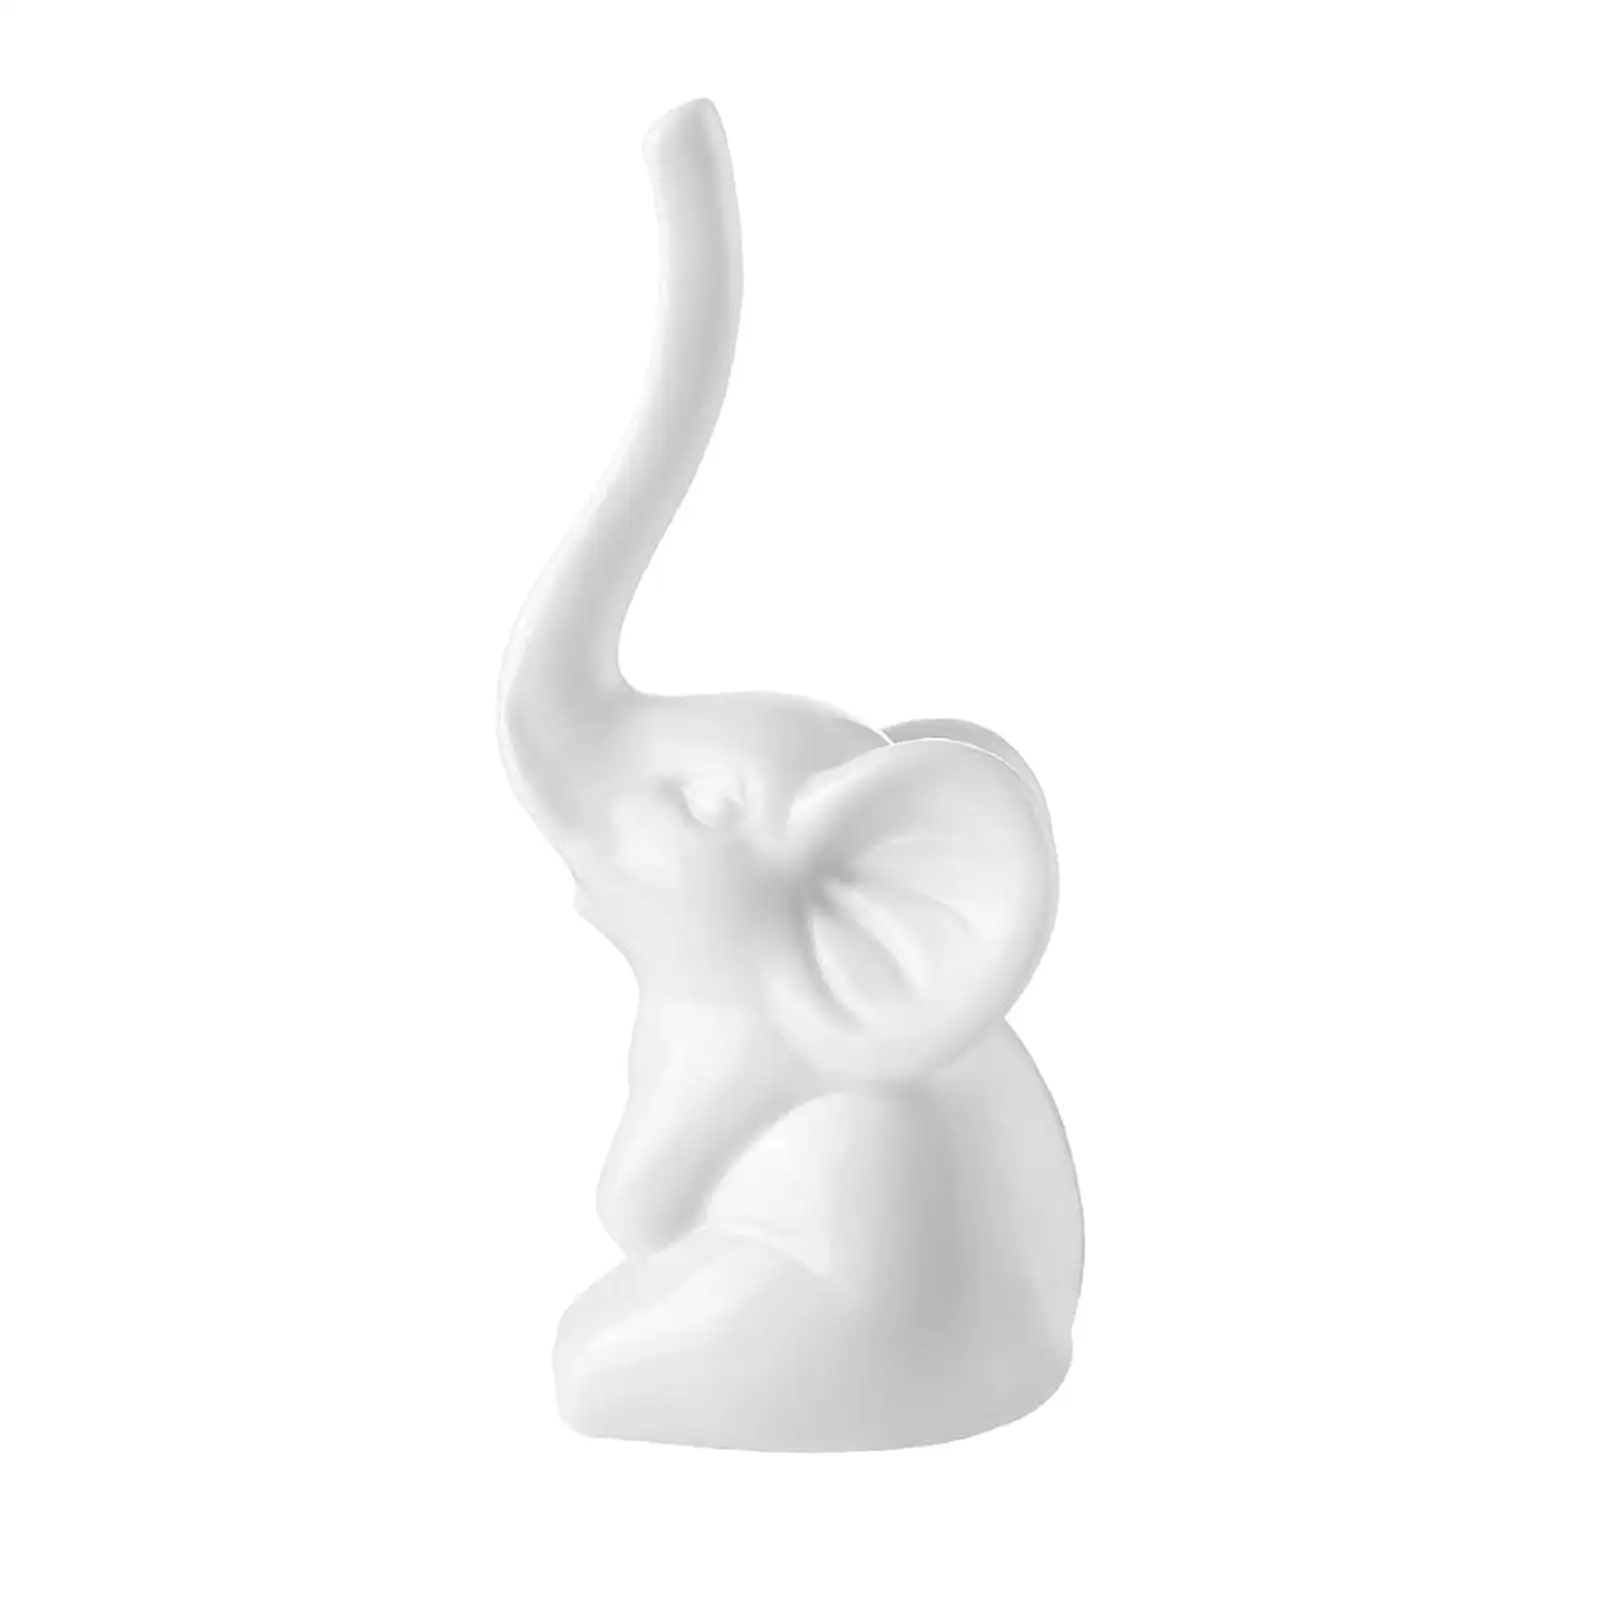 Porcelain Elephant Statue Ring Holder Small and Cute Multipurpose Adorable Height 4.72inch for Dressing Table Lightweight